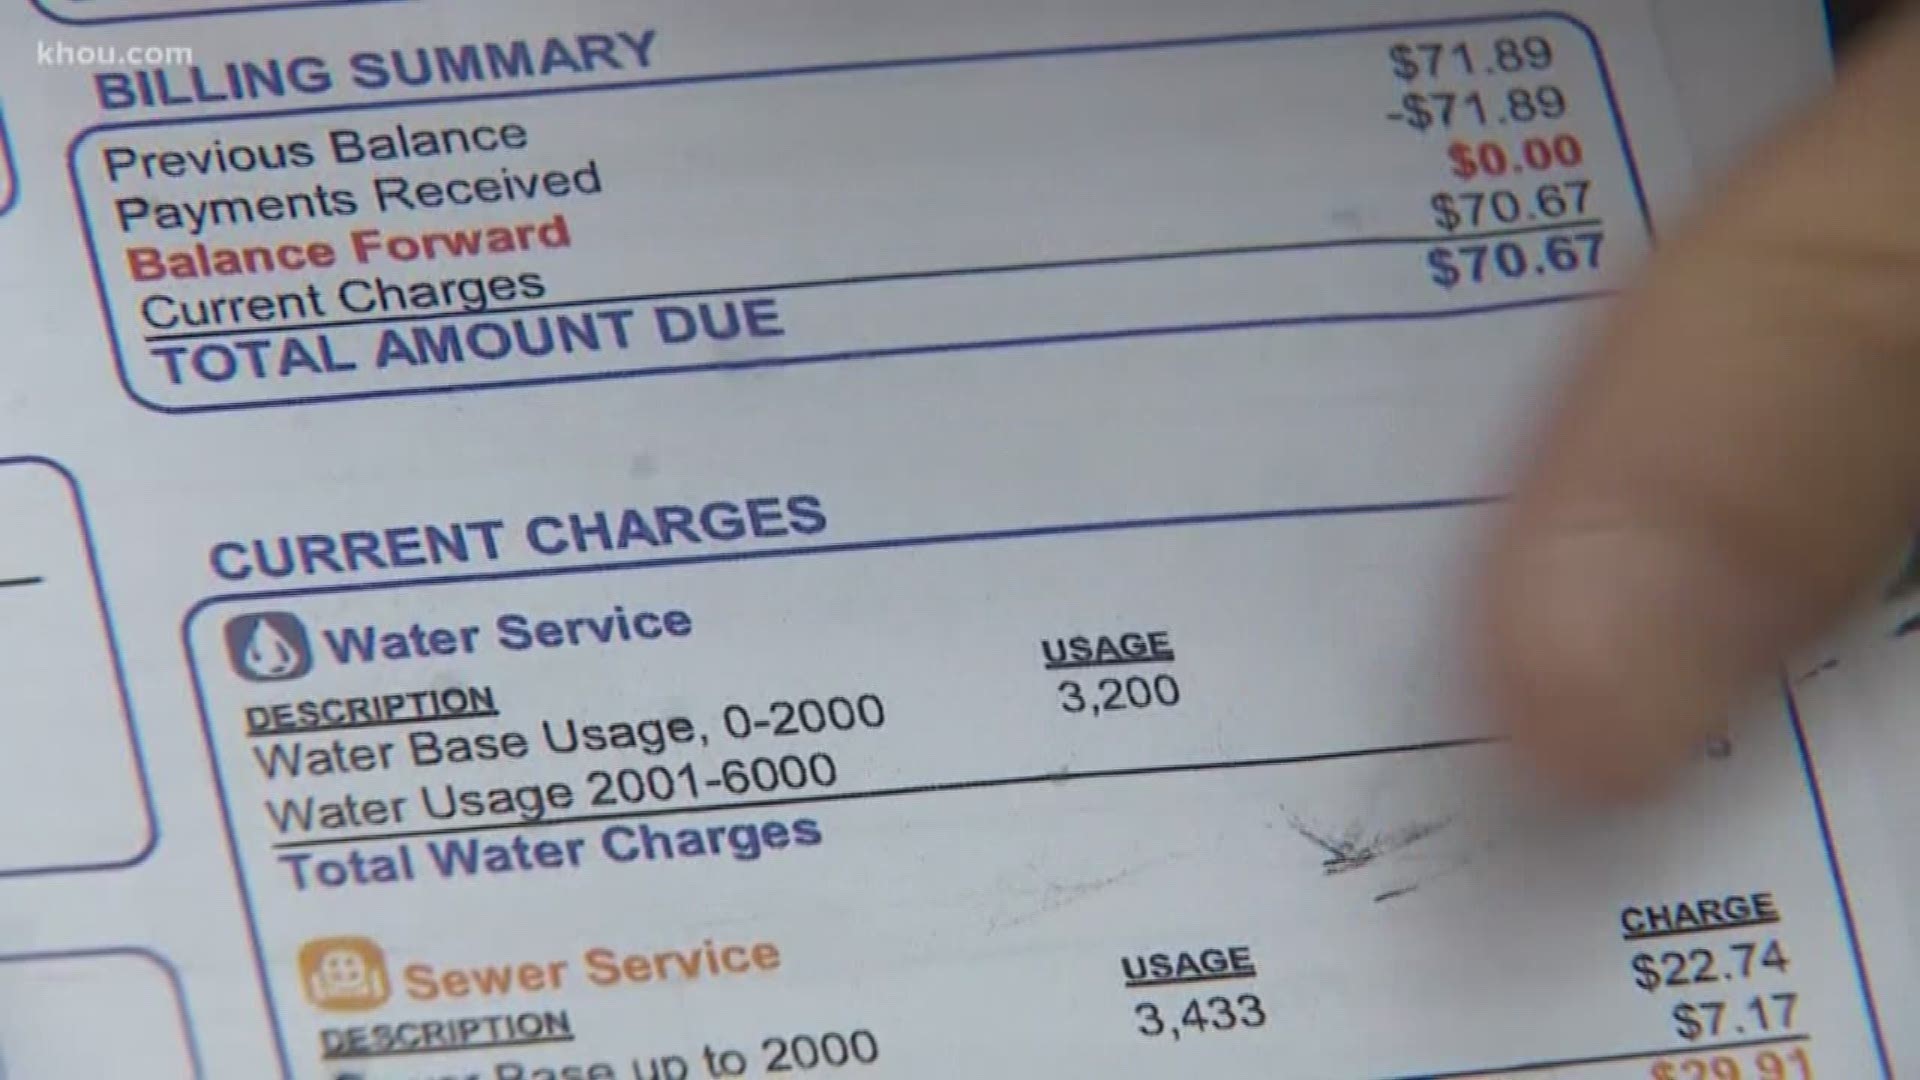 city of quincy il water bill